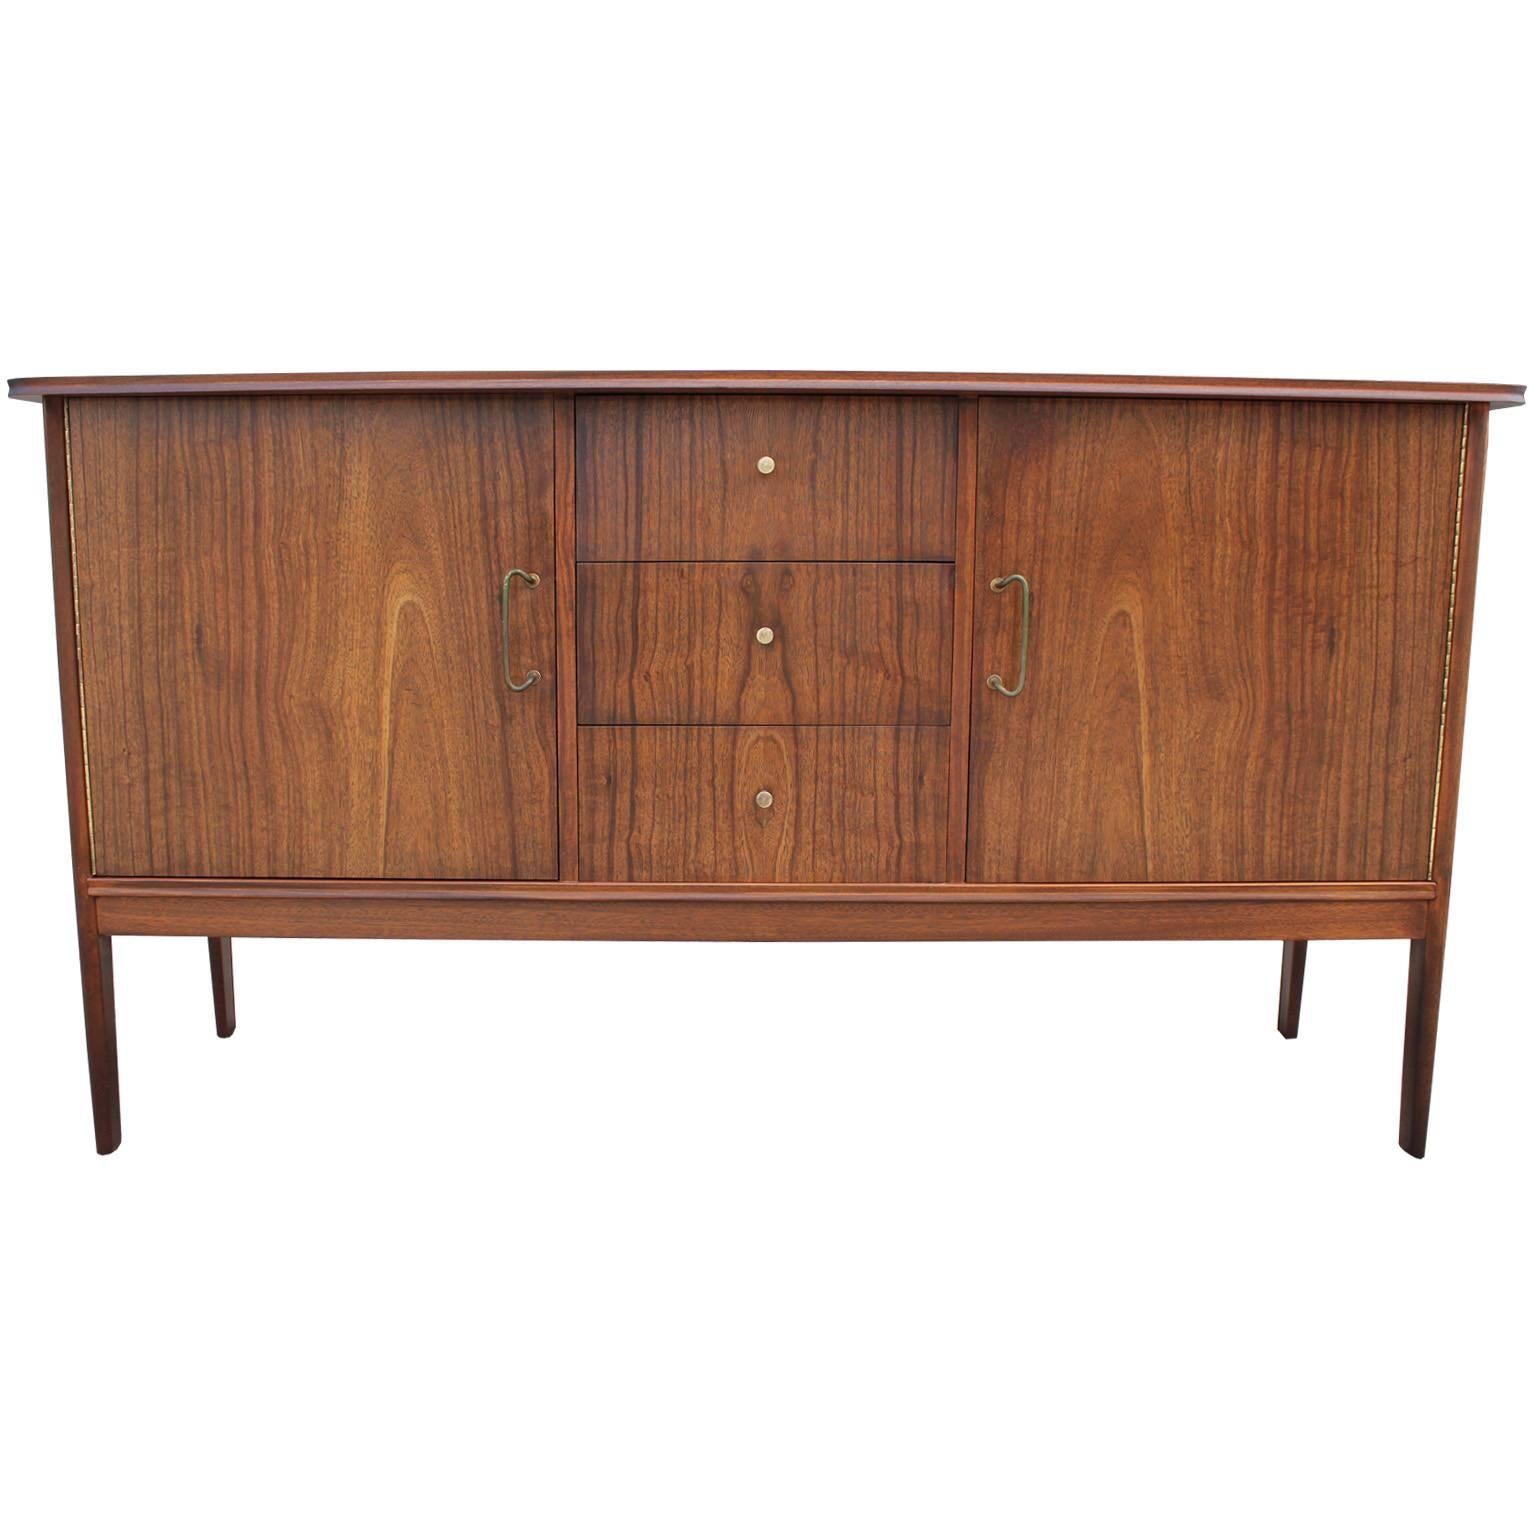 Beautiful walnut credenza or sideboard. Walnut has a beautiful, matched butterfly grain. Two cabinet doors each open to a single shelf. Three drawers provide additional storage. Brass hardware has an excellent patina.